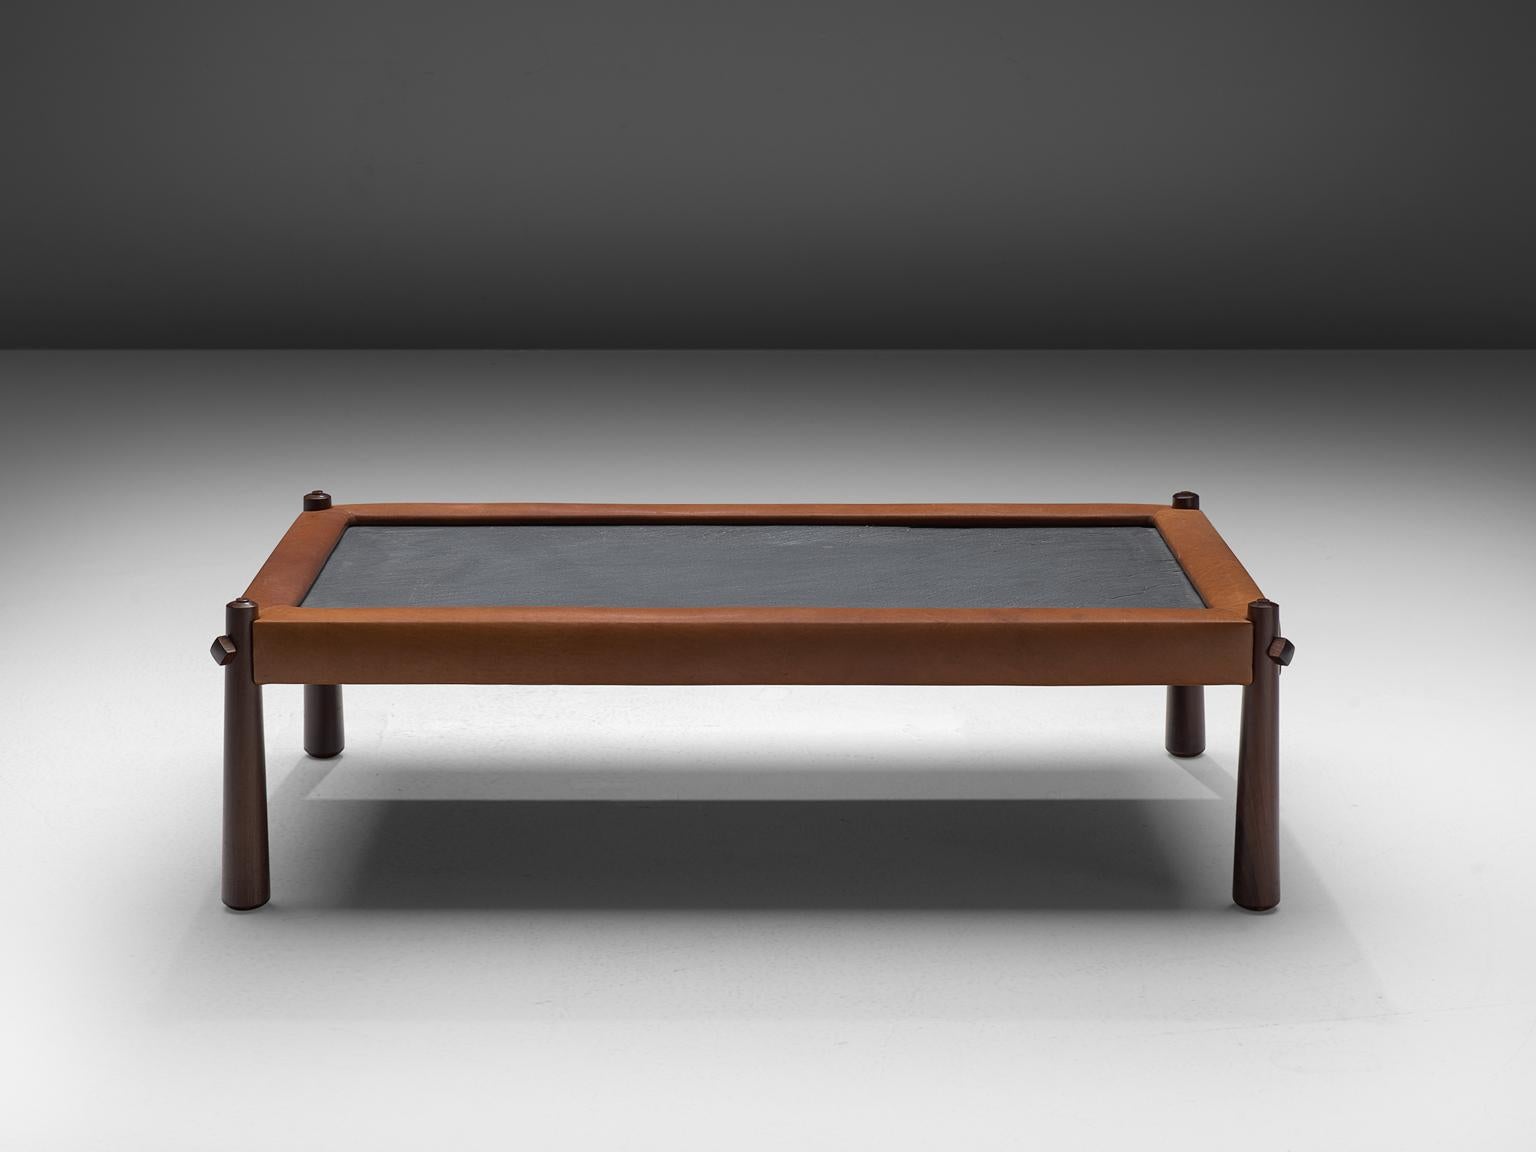 Percival Lafer, coffee table, slate, leather and rosewood, Brazil, 1970s

This coffee table by Brazilian designer Percival Lafer features a slate chalkboard surface. The tabletop is embedded with cognac leather which is very notable. The rosewood